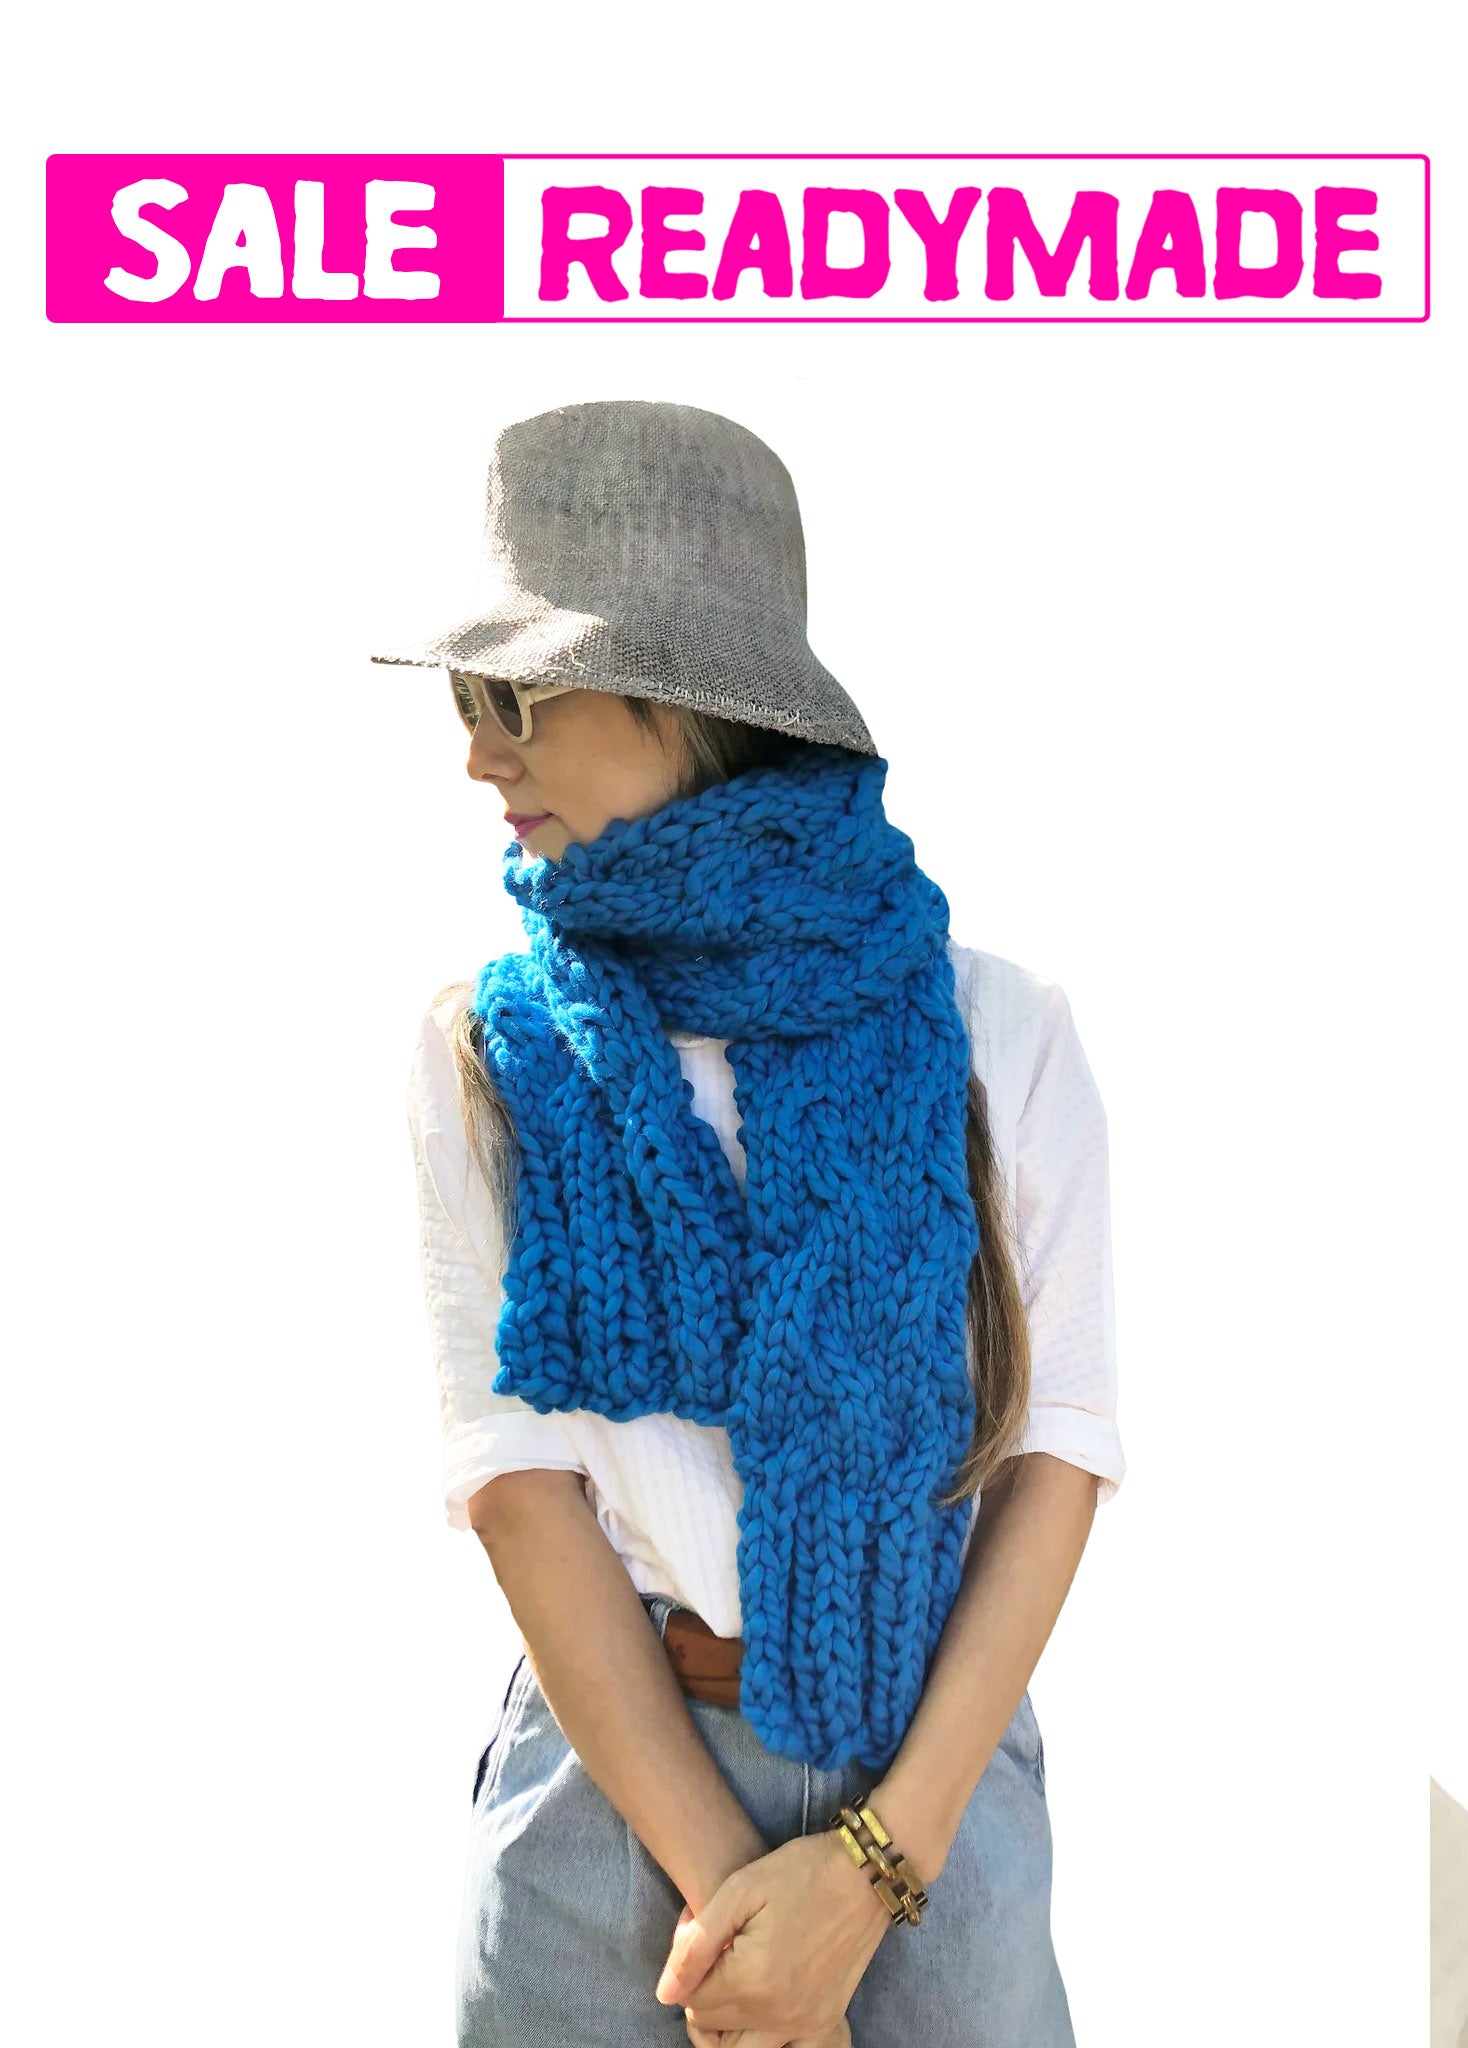 READY TO SHIP READYMADE CLEARANCE SALE!! - Cable Scarf - Merino